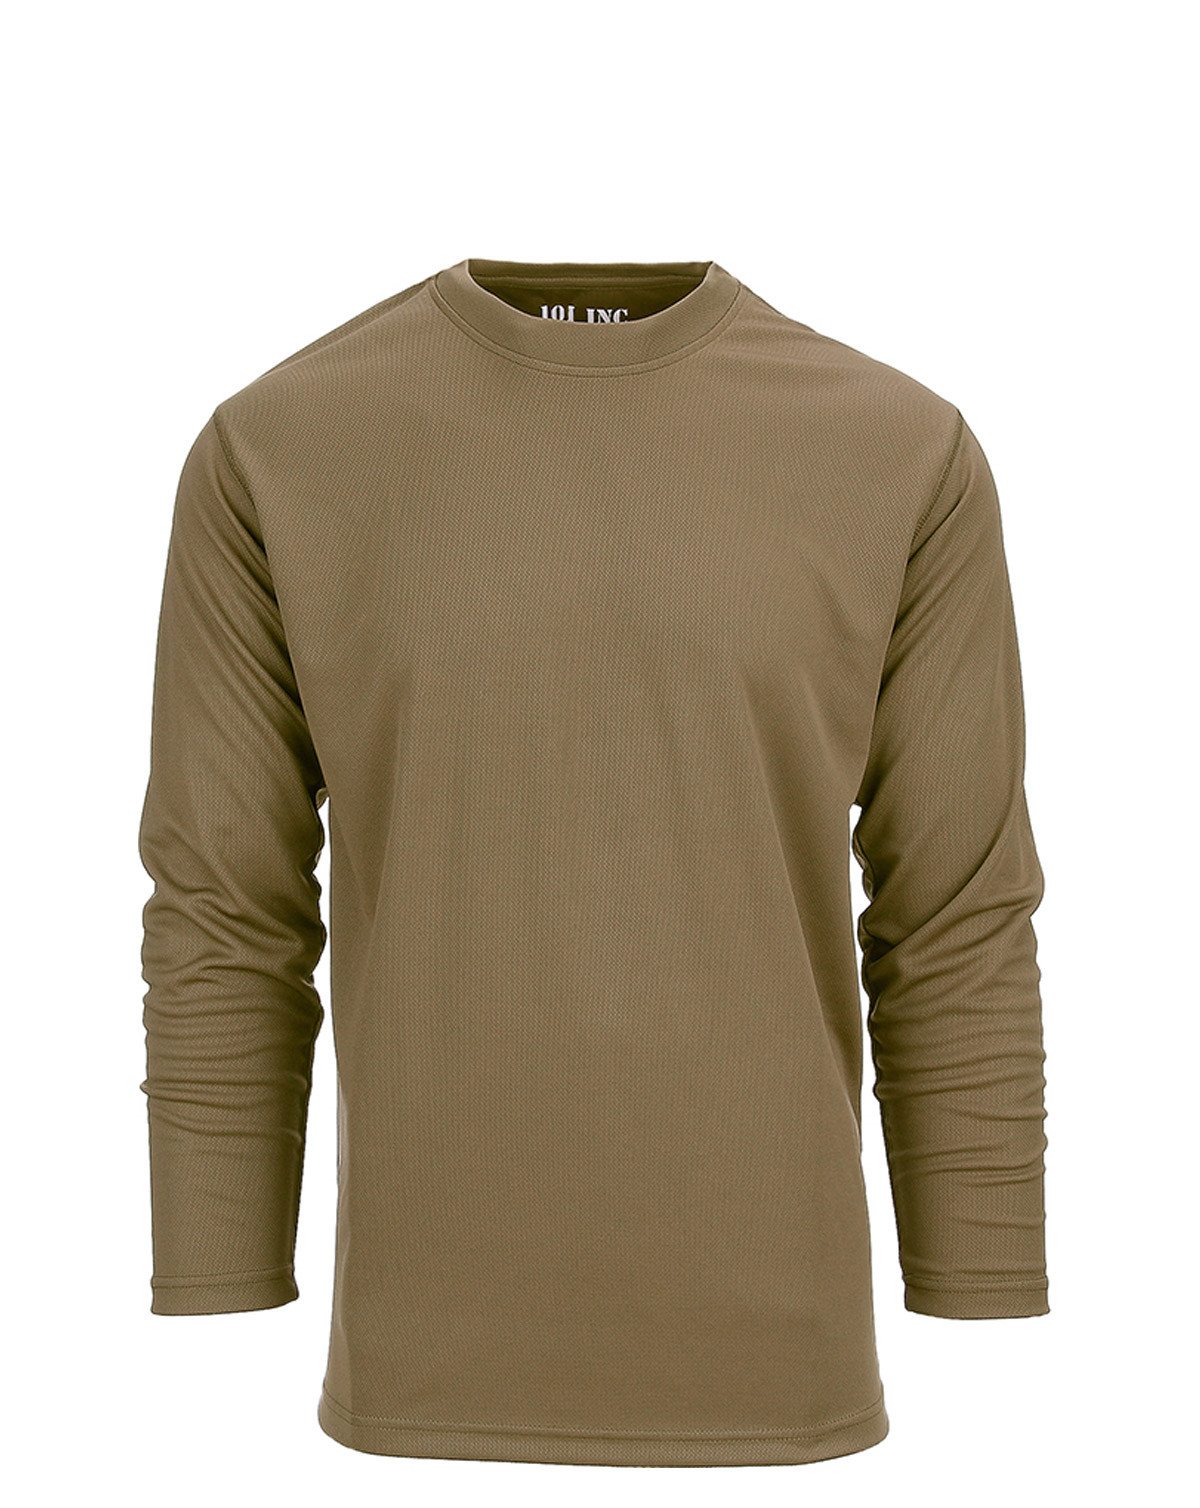 Fostex Tactical T-shirt Quick Dry Long Sleeve (Coyote Brun, 3XL)